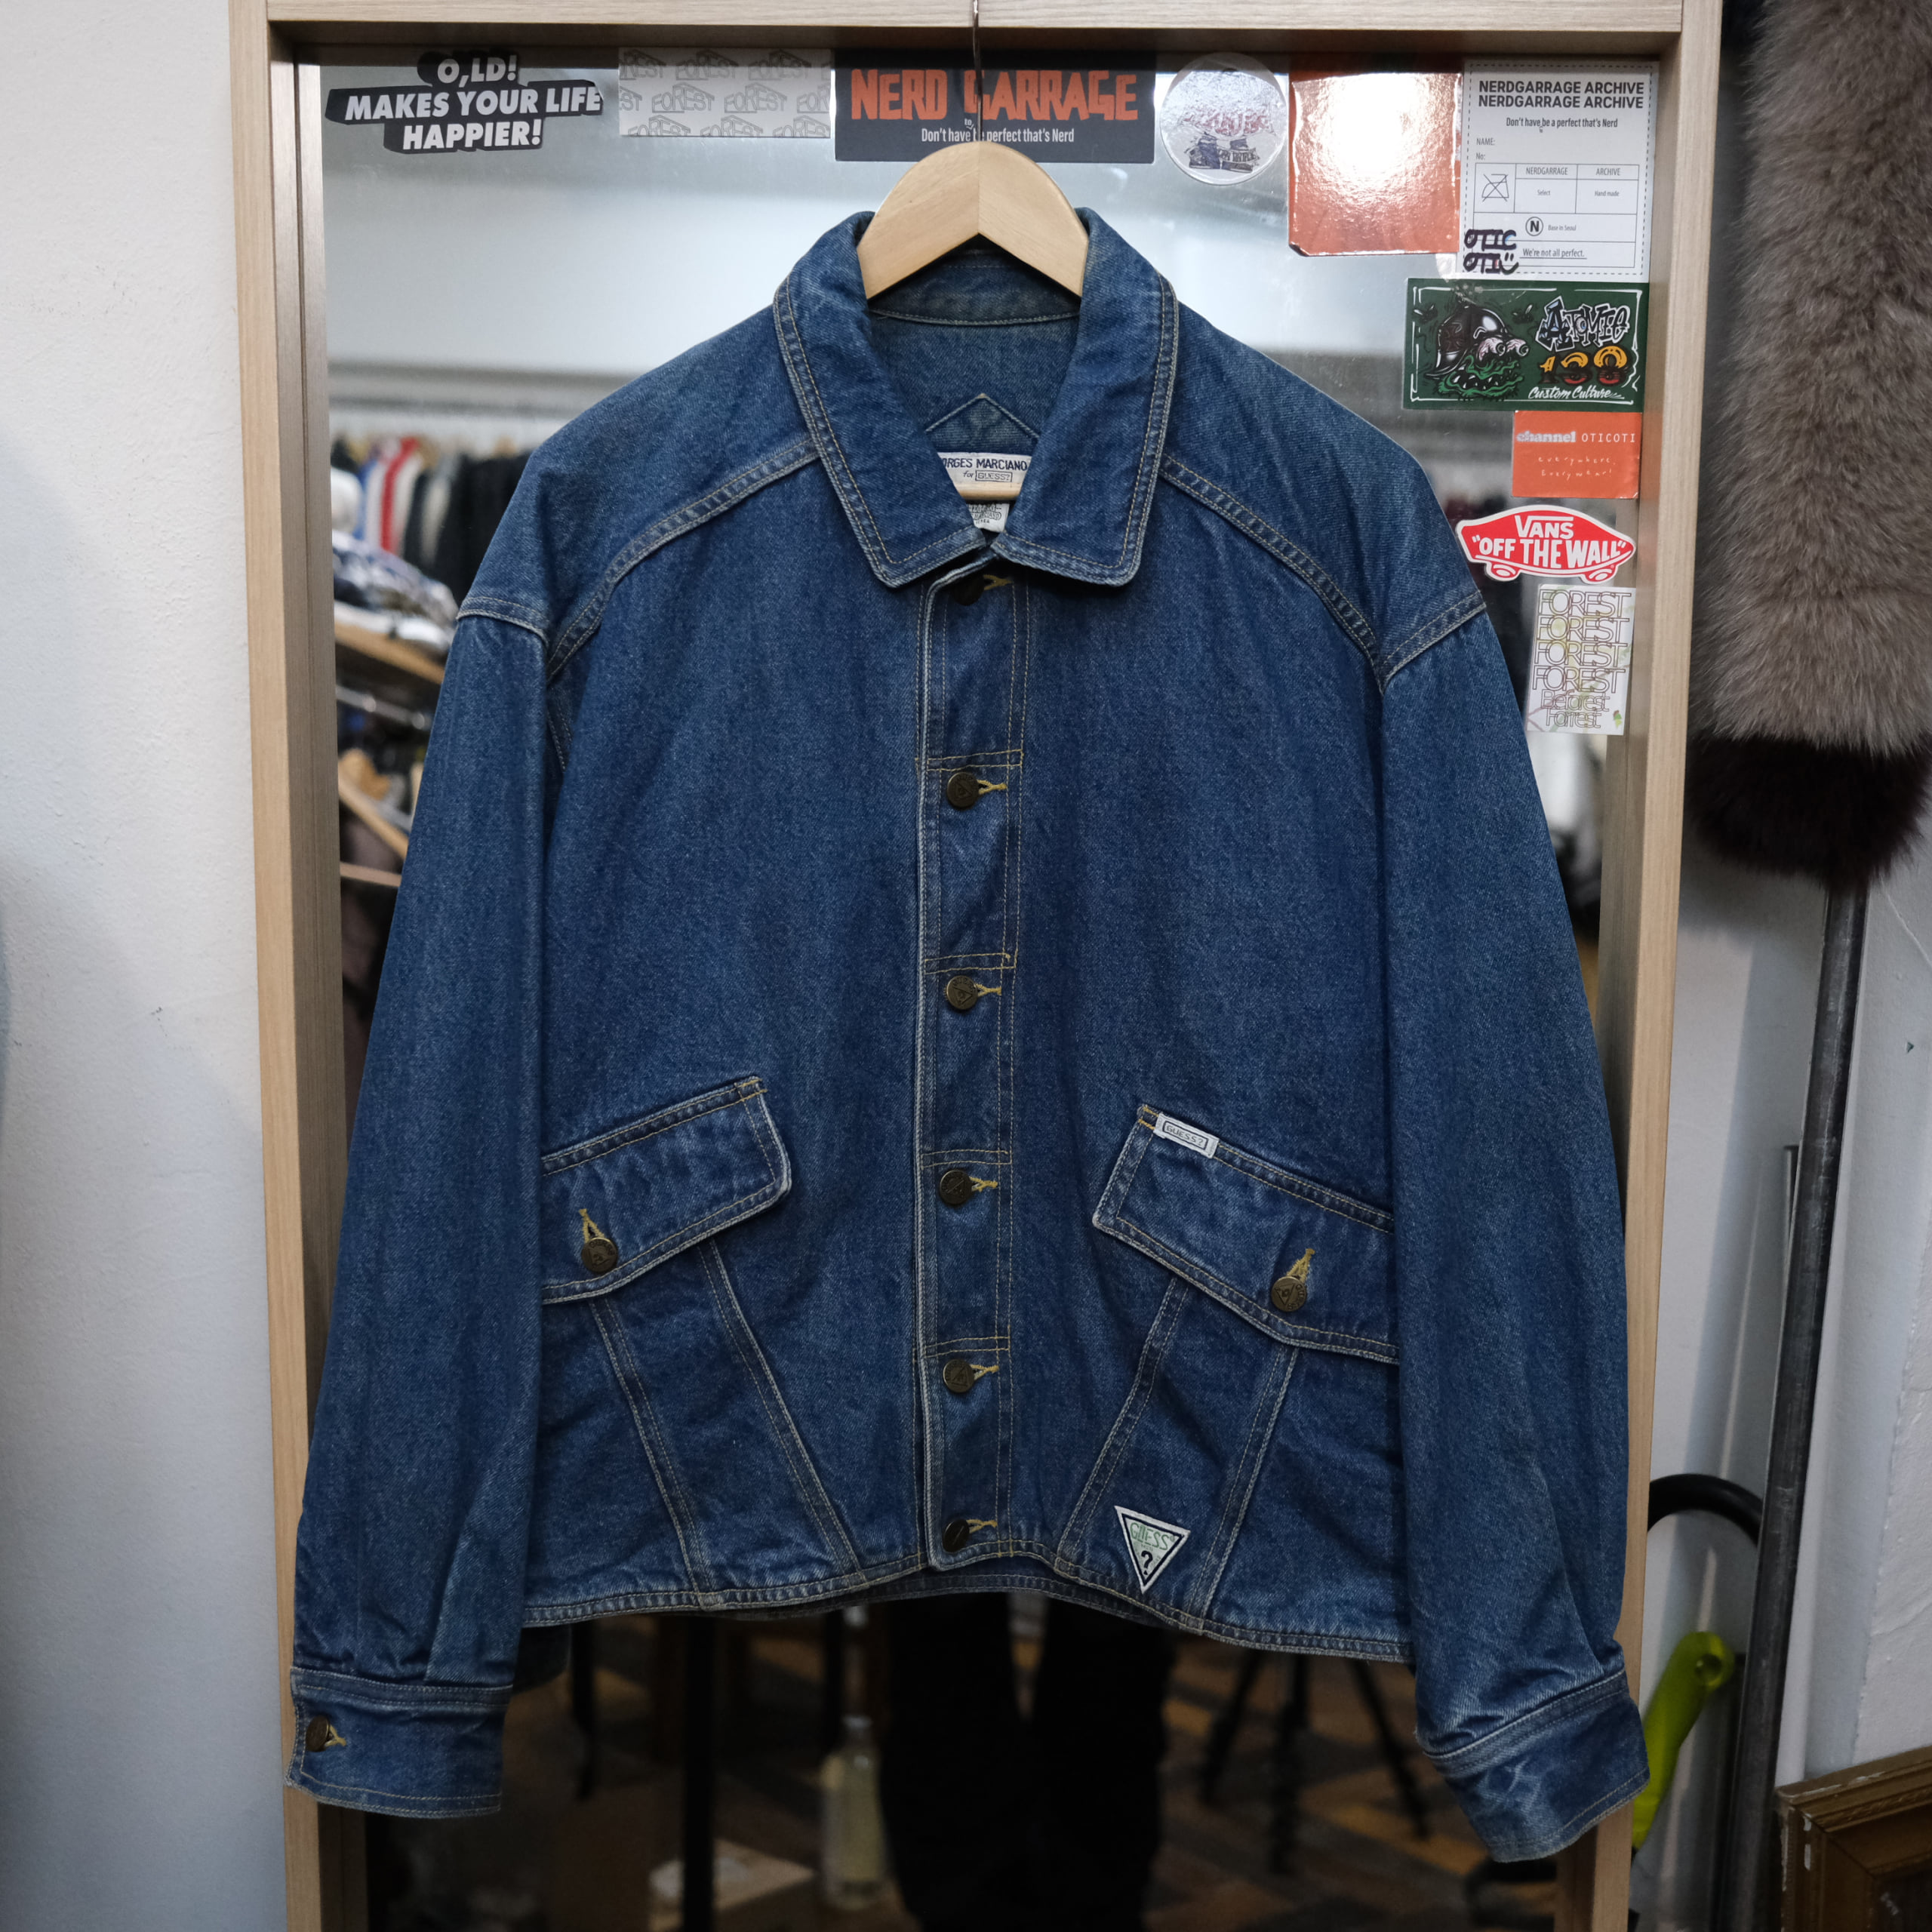 Guess denim jacket for Georges Marciano